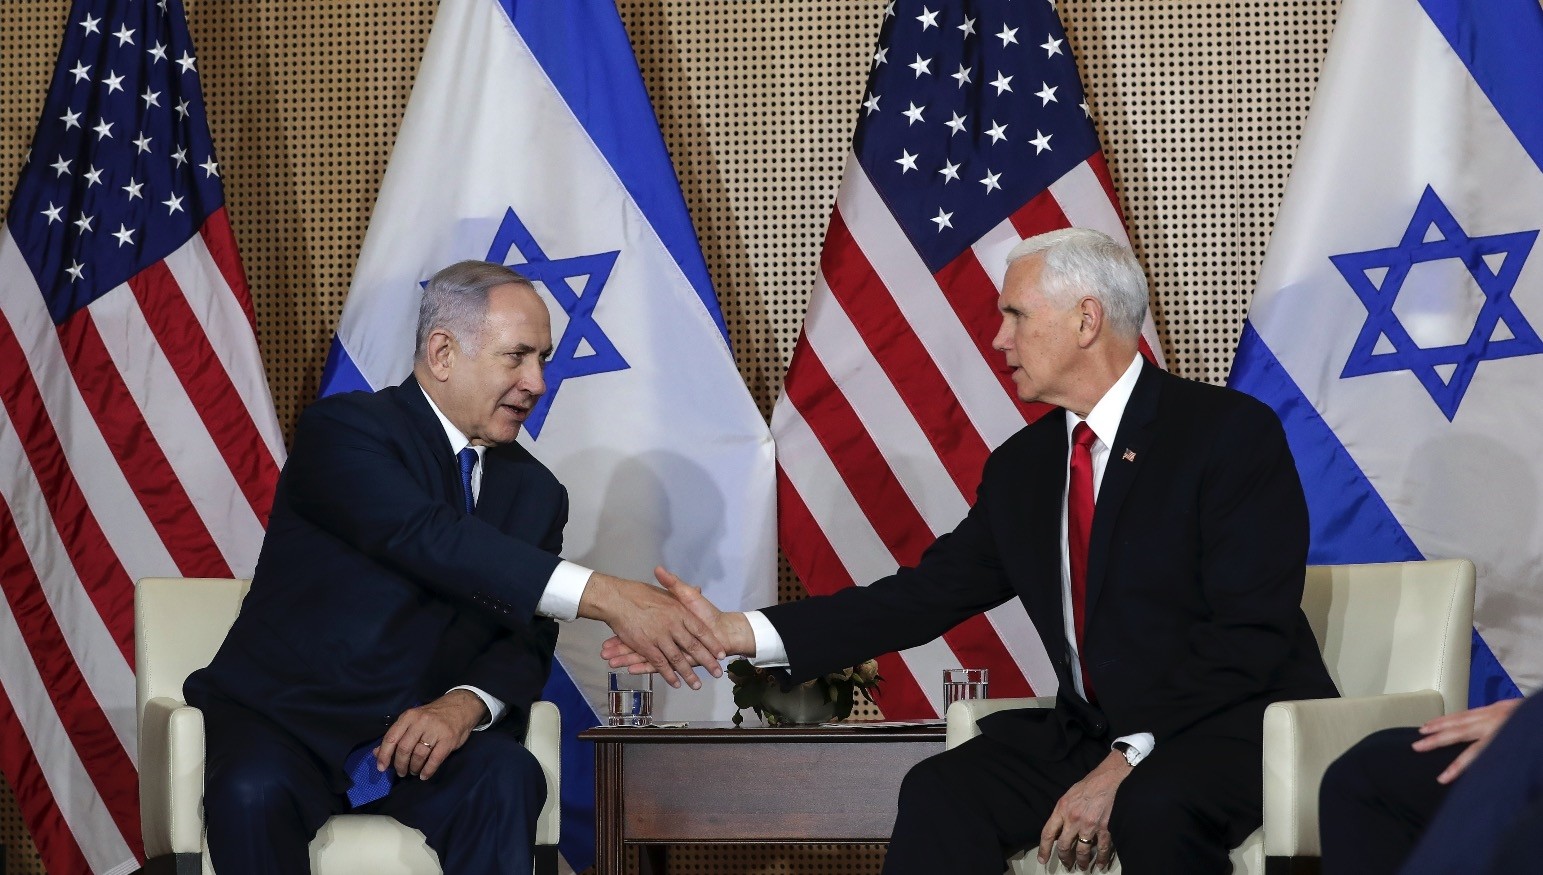 Israeli Prime Minister Benjamin Netanyahu (L) shakes hands with U.S. Vice President Mike Pence at a bilateral meeting in Warsaw, Poland, Feb. 14, 2019.